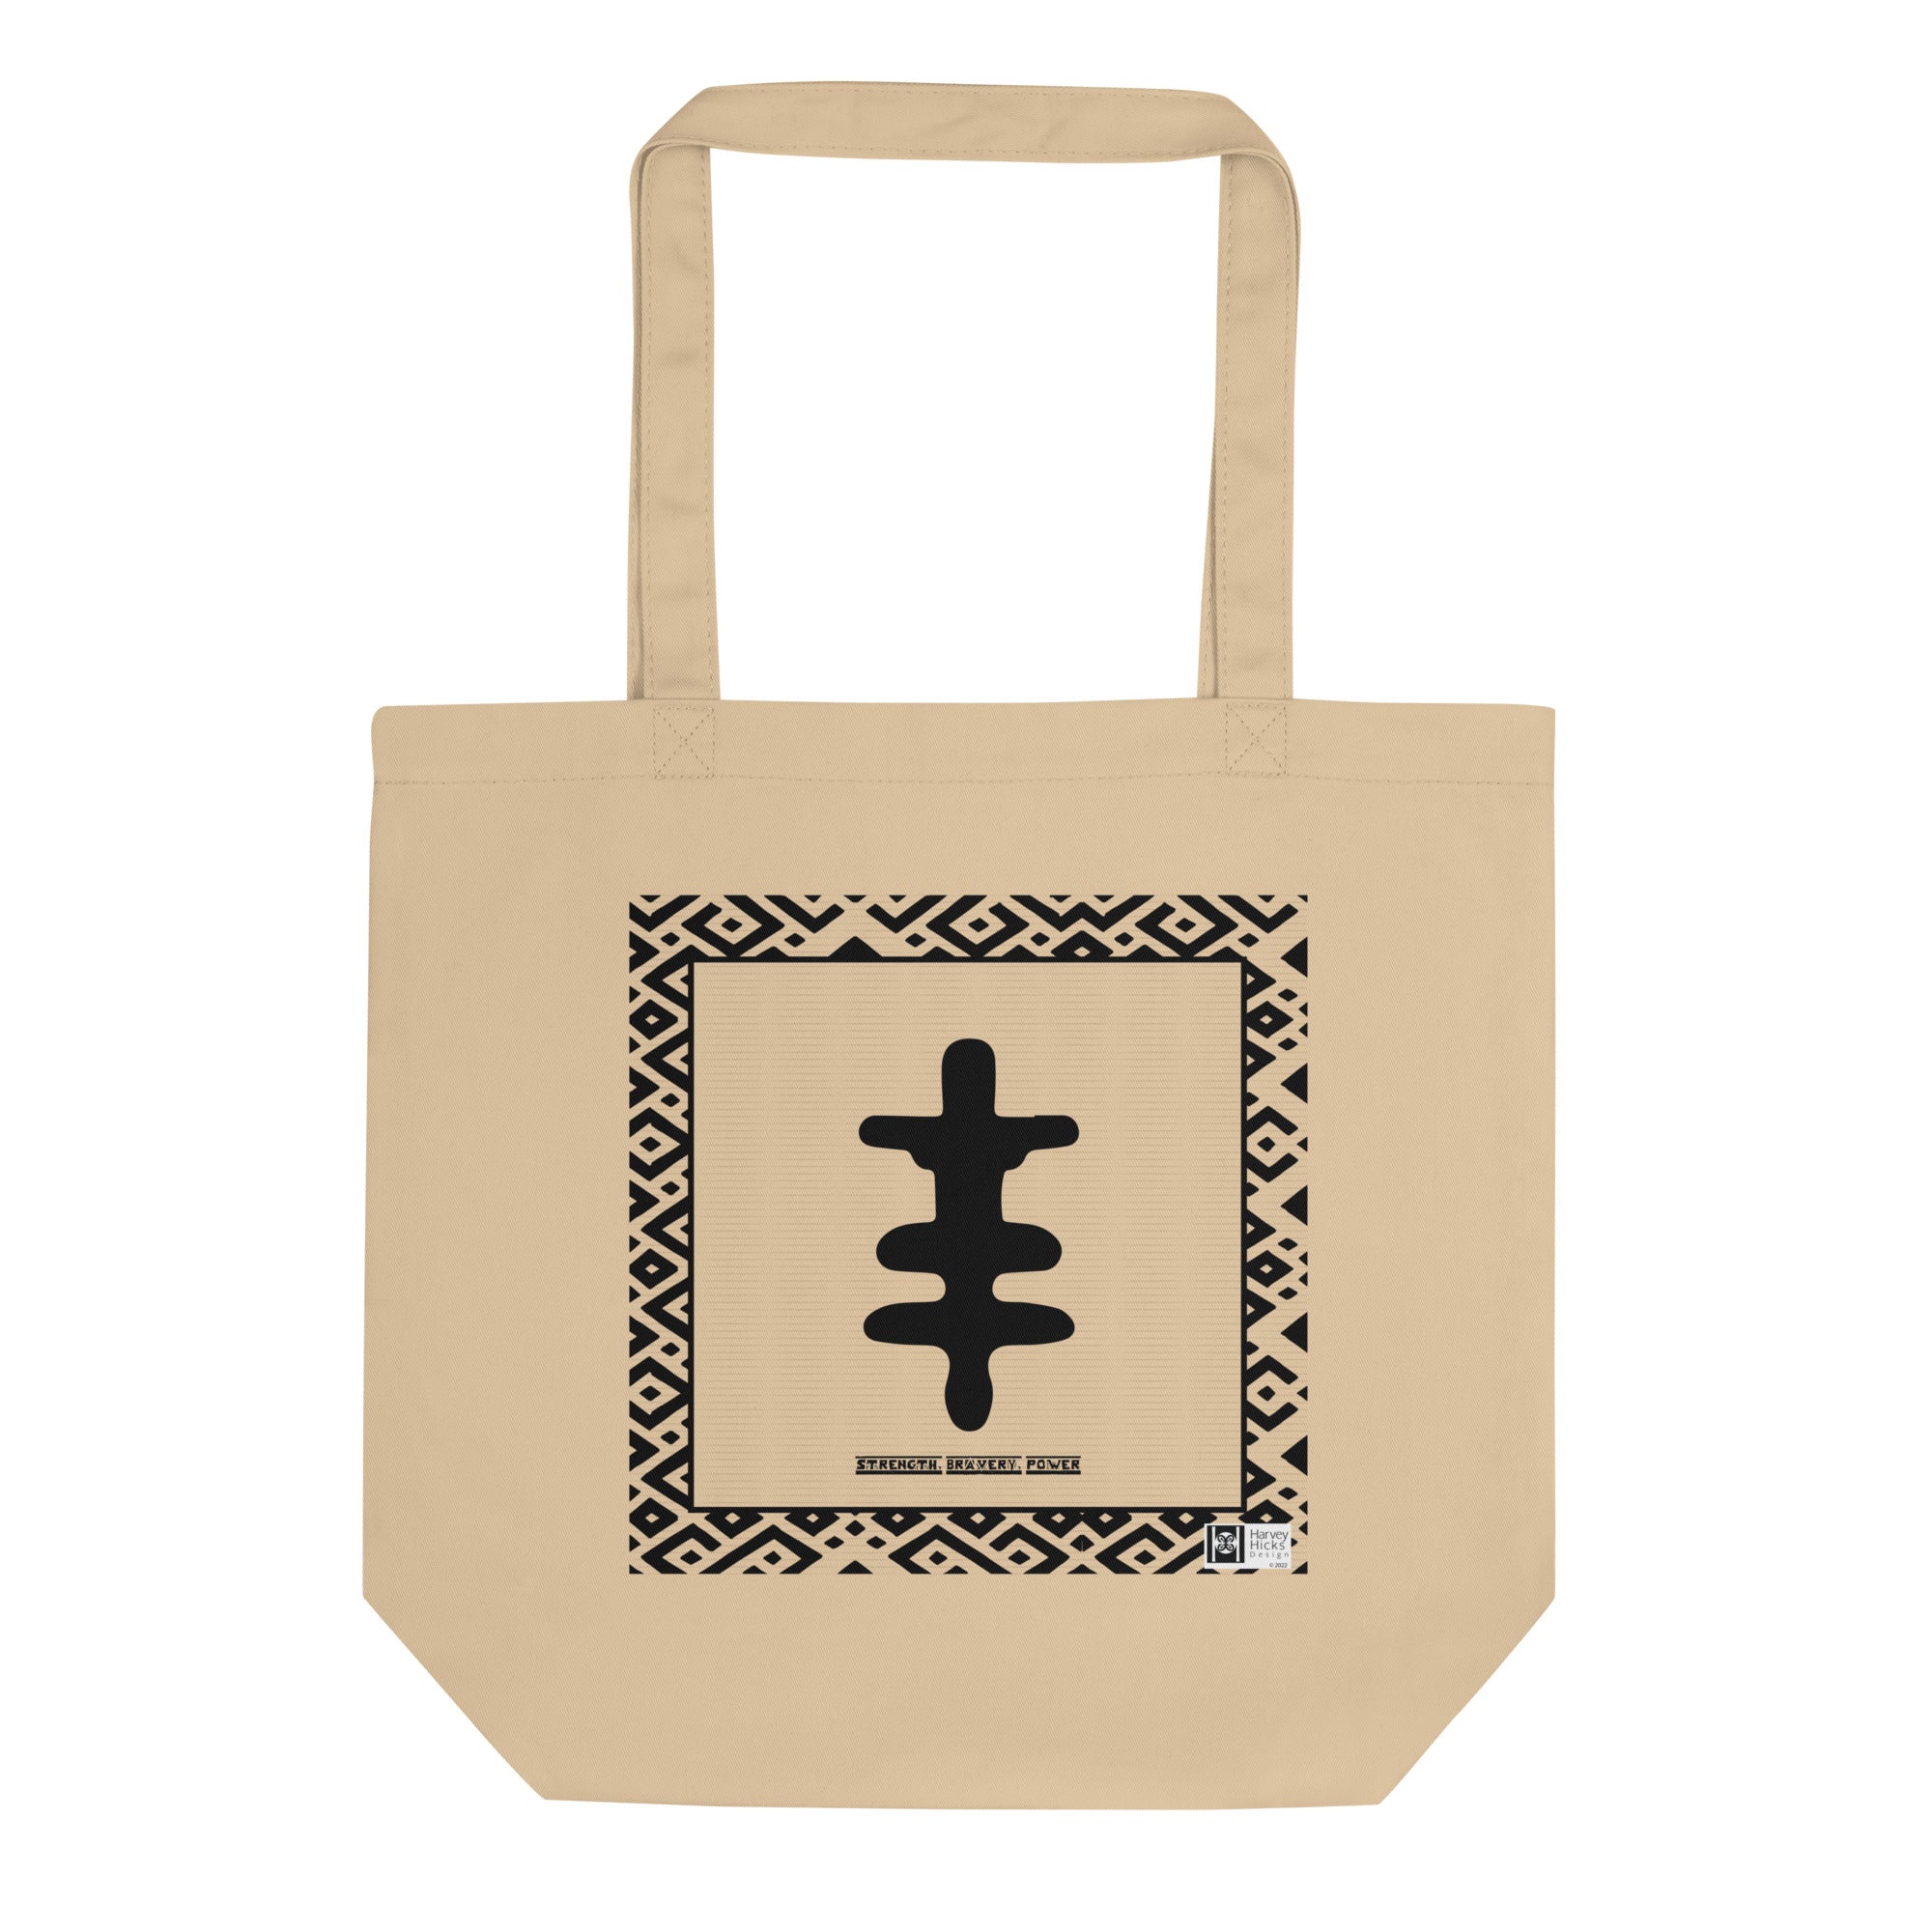 100% cotton Eco Tote Bag, featuring the Adinkra symbol for strength and bravery